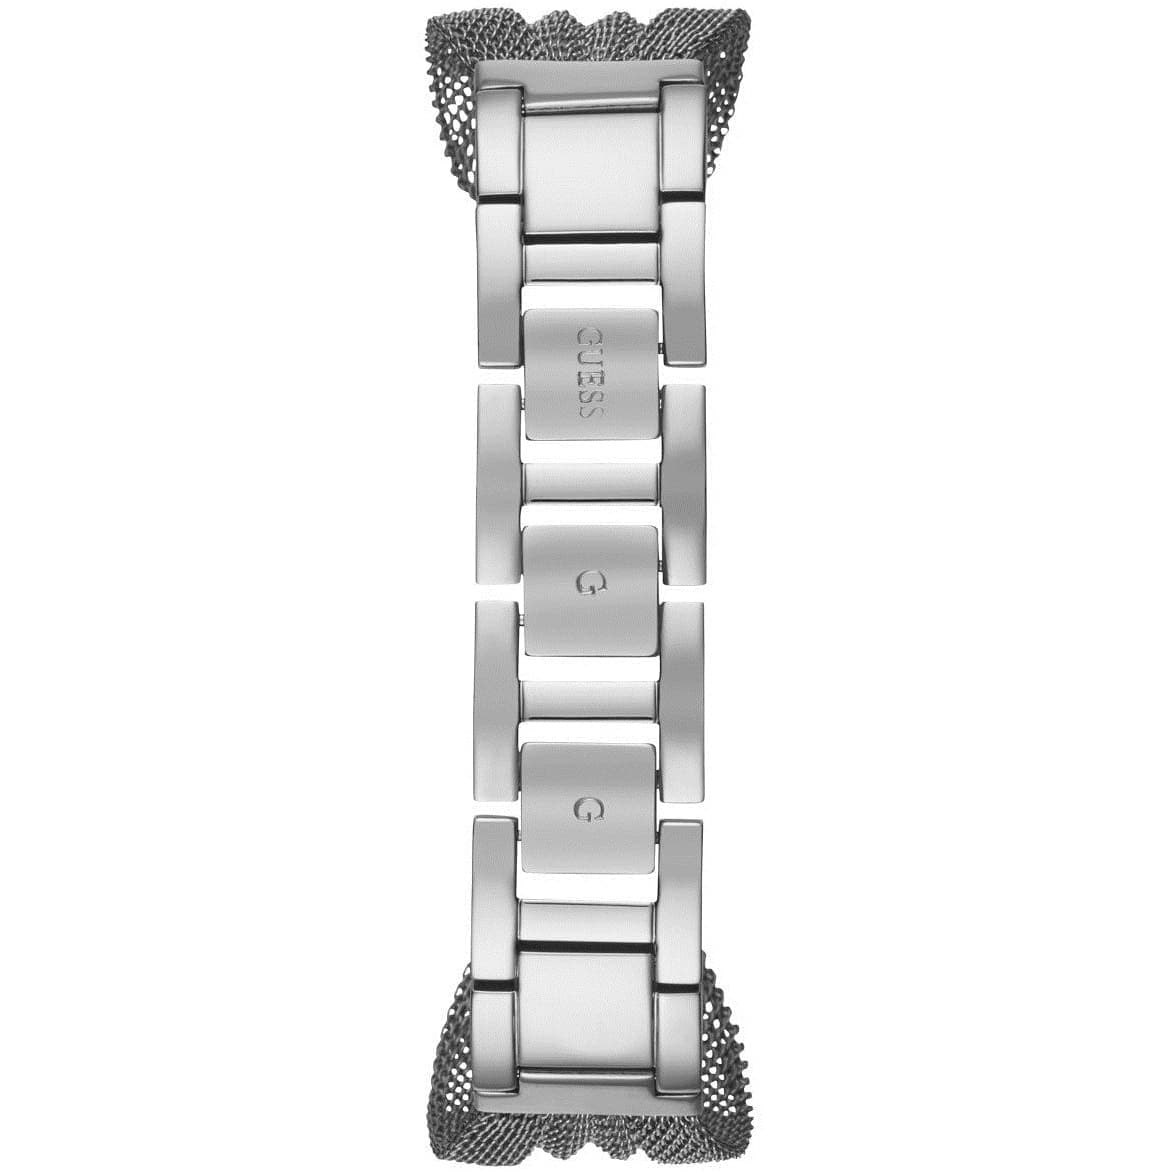 Guess Watch For Women W1083L1 - cocyta.com 